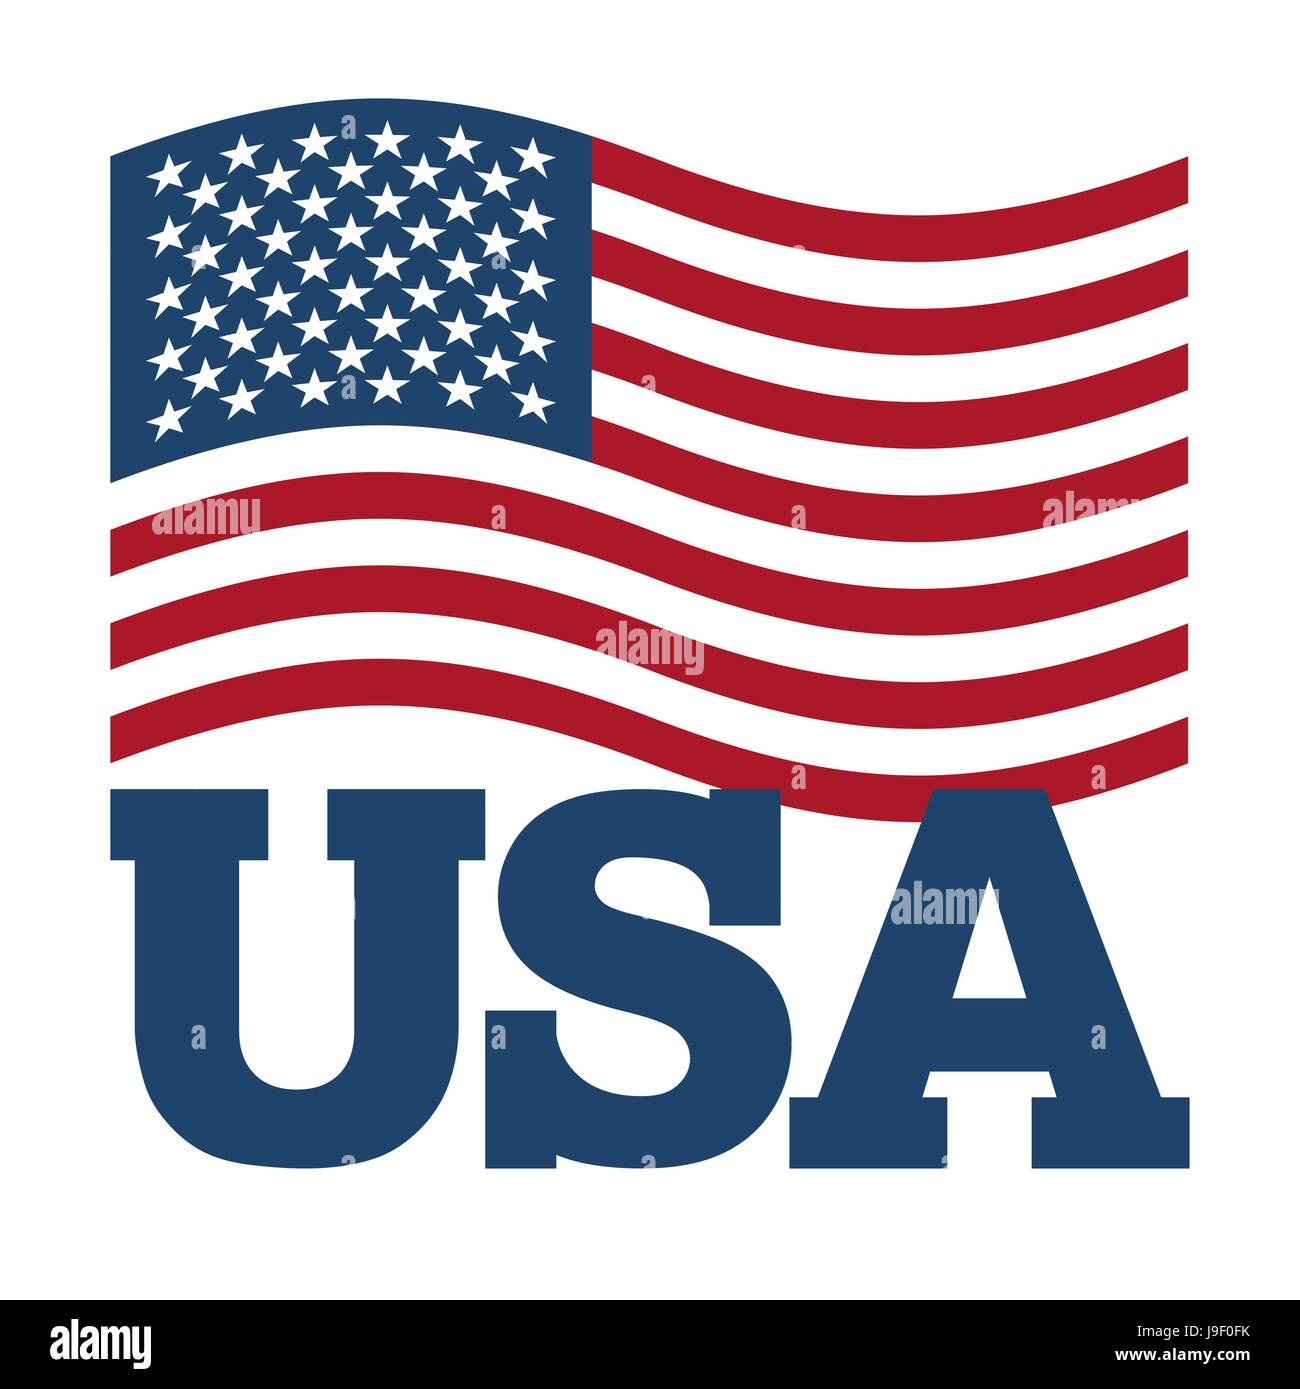 Flag USA. Developing America flag on white background. Patriotic illustration. National State symbol of country America. Sign United States Stock Vector